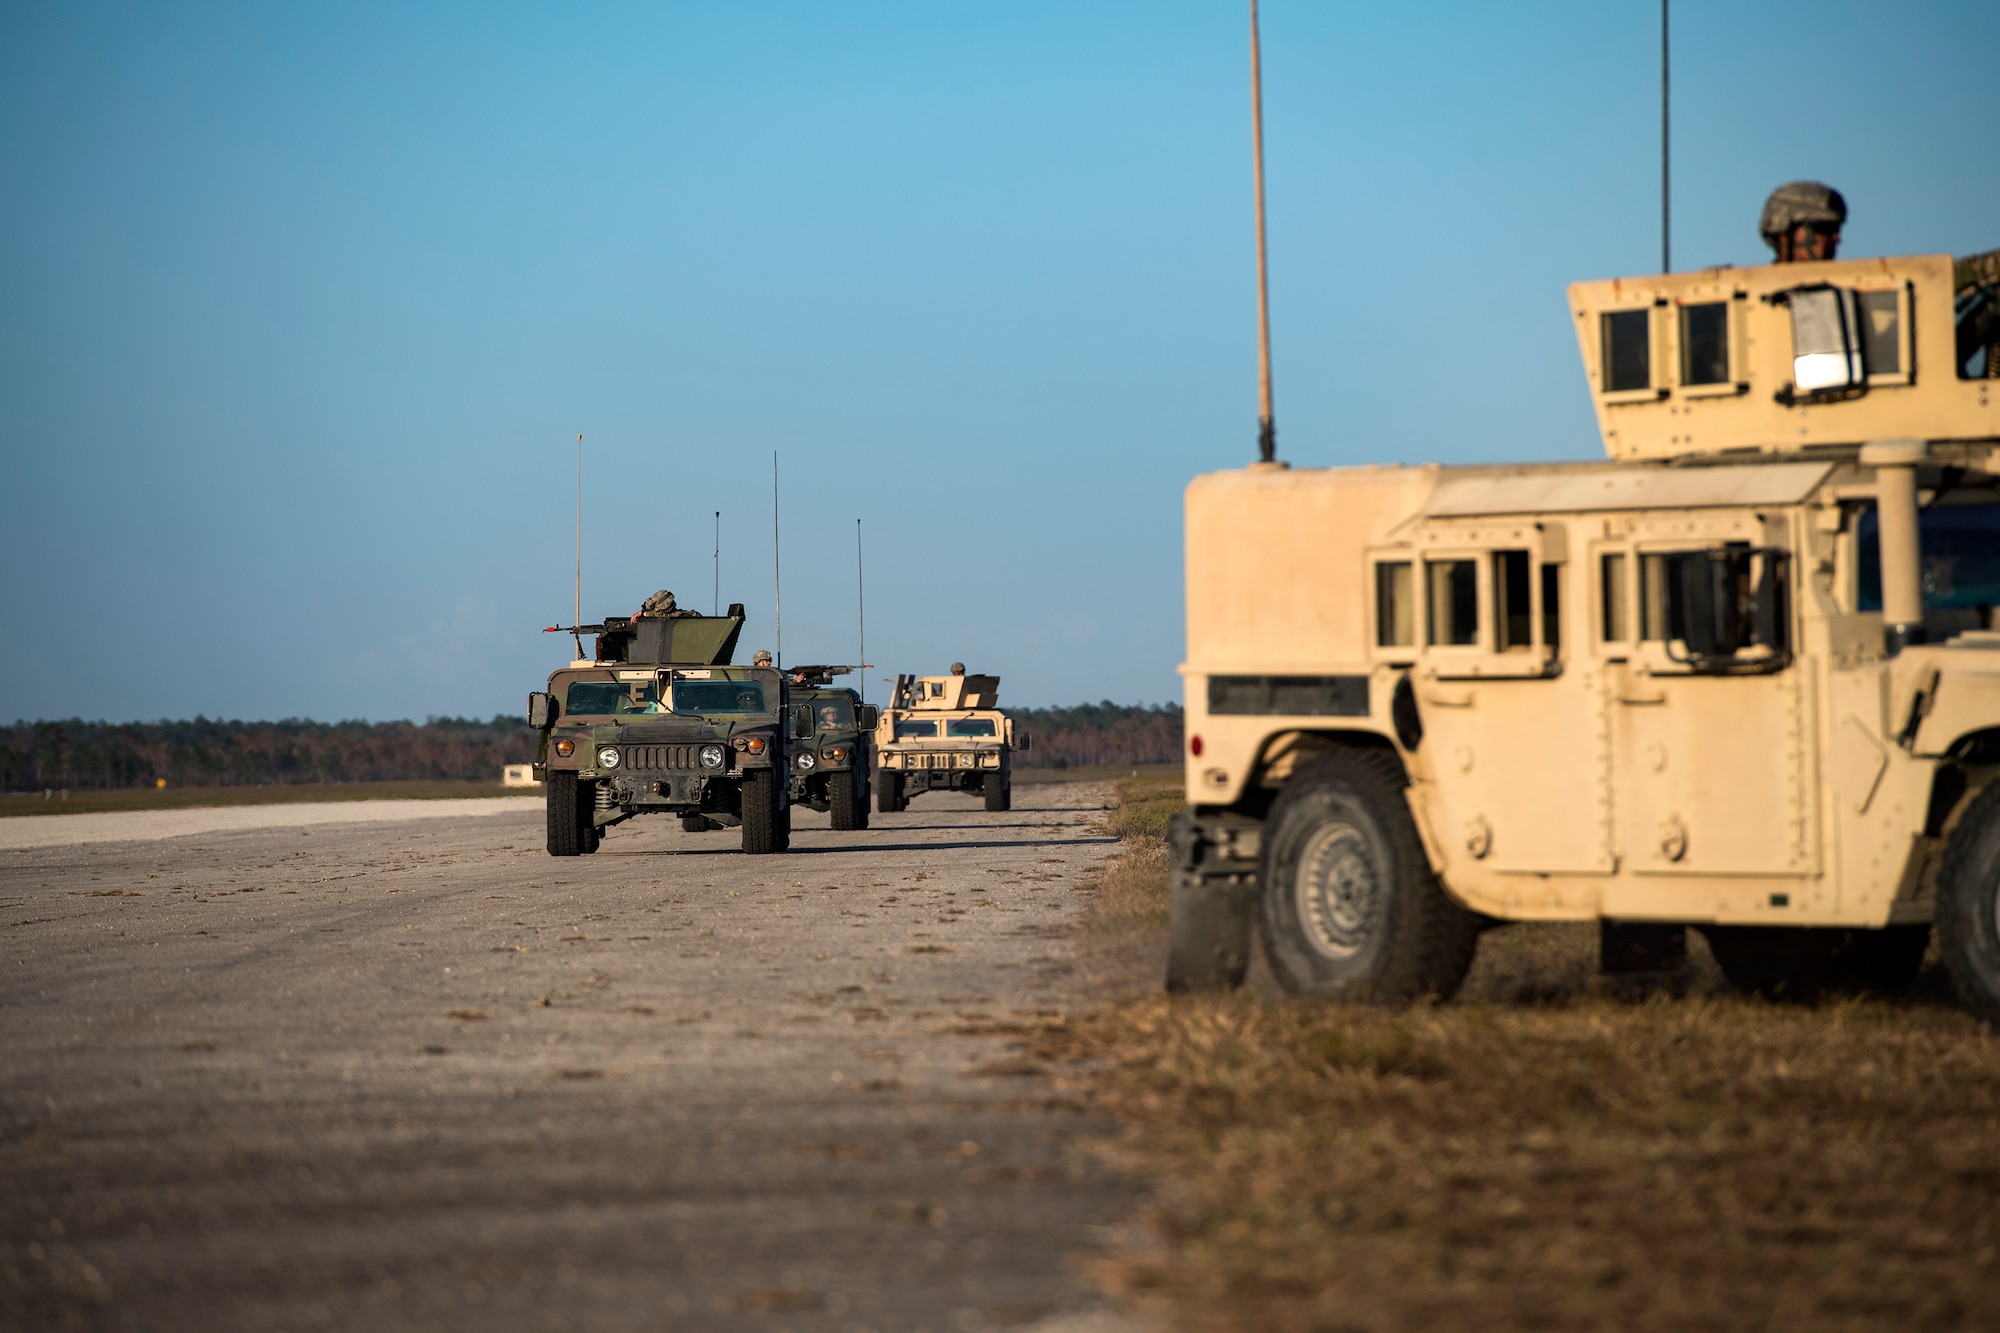 Airmen drive Humvees back to base after patrolling the surrounding area during a Mission Readiness Exercise, March 11, 2017, at Avon Park Air Force Range, Fla. As the 822d Base Defense Squadron‘s only vehicle maintainer, Staff Sgt. Joel Kirtley, 822d BDS NCO in charge of vehicular equipment, is responsible for anything with a motor, from Humvees to golf carts and generators. (U.S. Air Force photo by Airman 1st Class Janiqua P. Robinson)